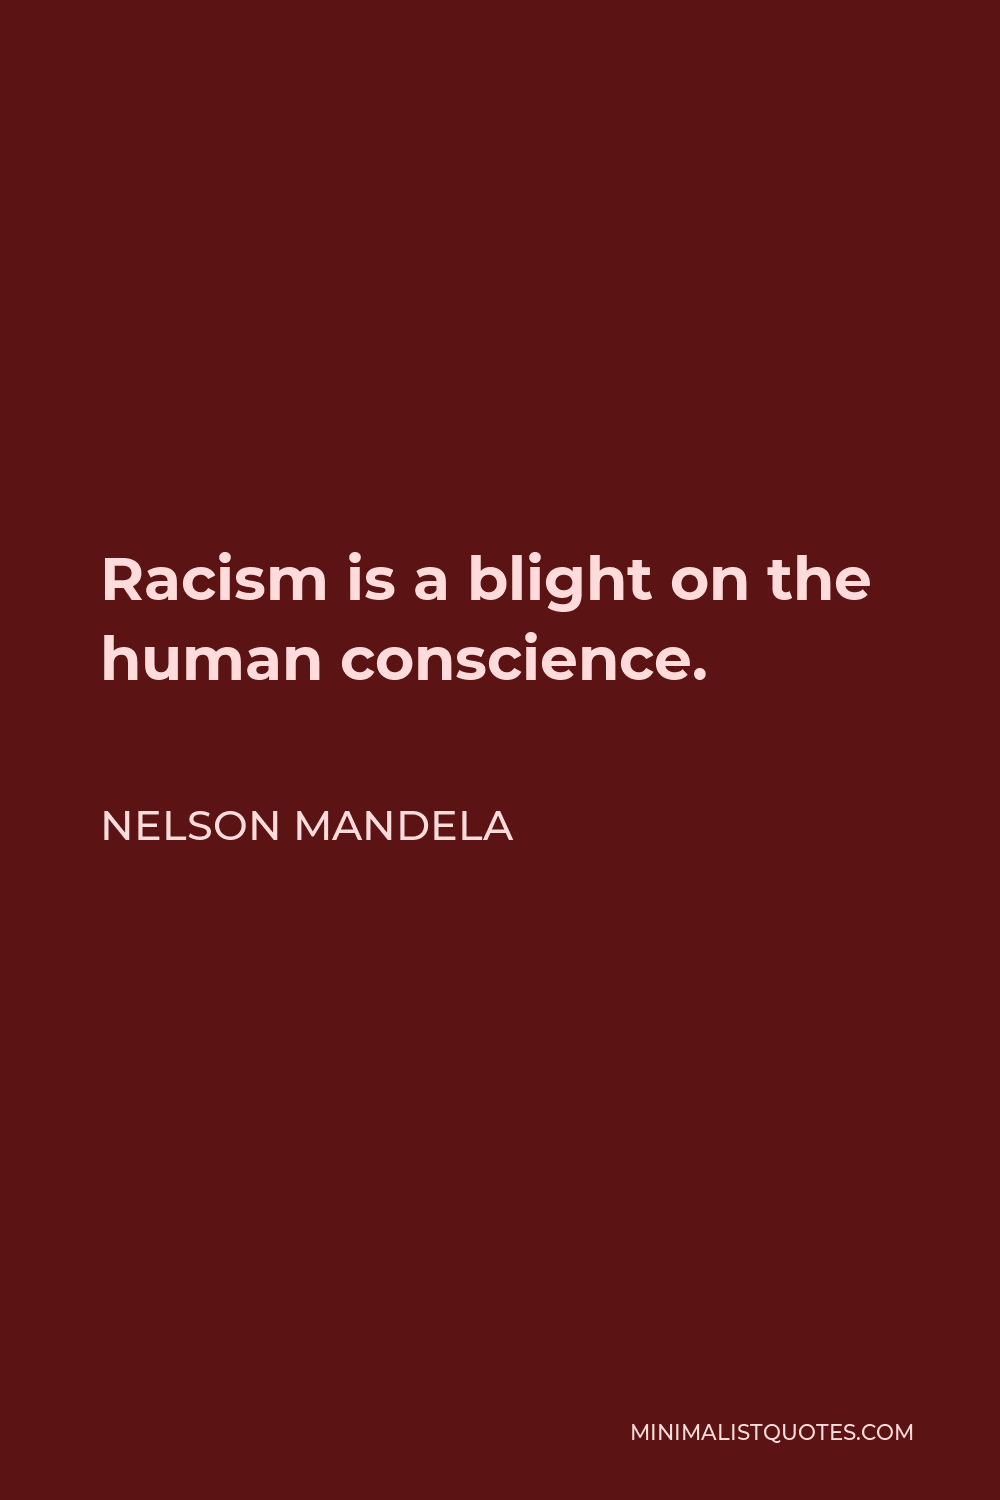 Nelson Mandela Quote - Racism is a blight on the human conscience.